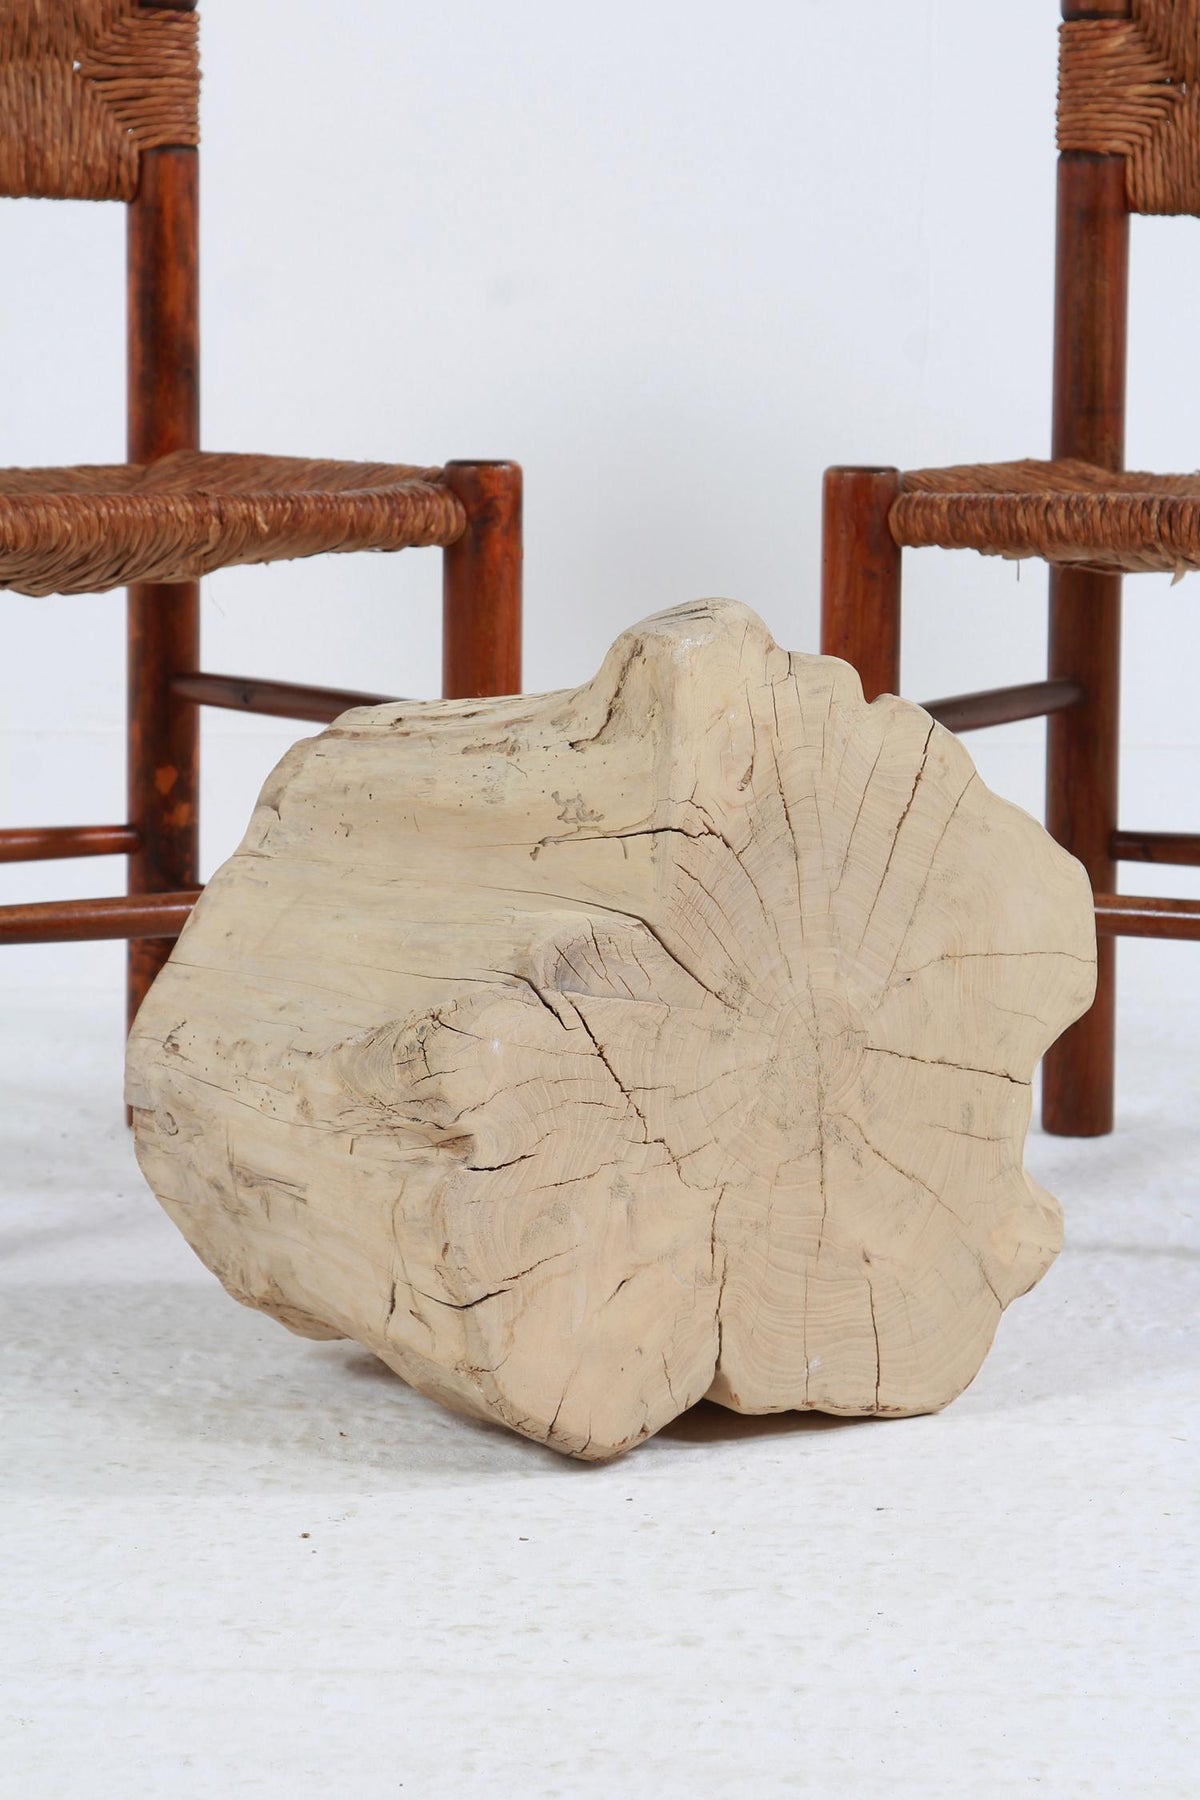 ORGANICALLY SHAPED SMALL  GNARLY ELM TREE STUMP COFFEE TABLE